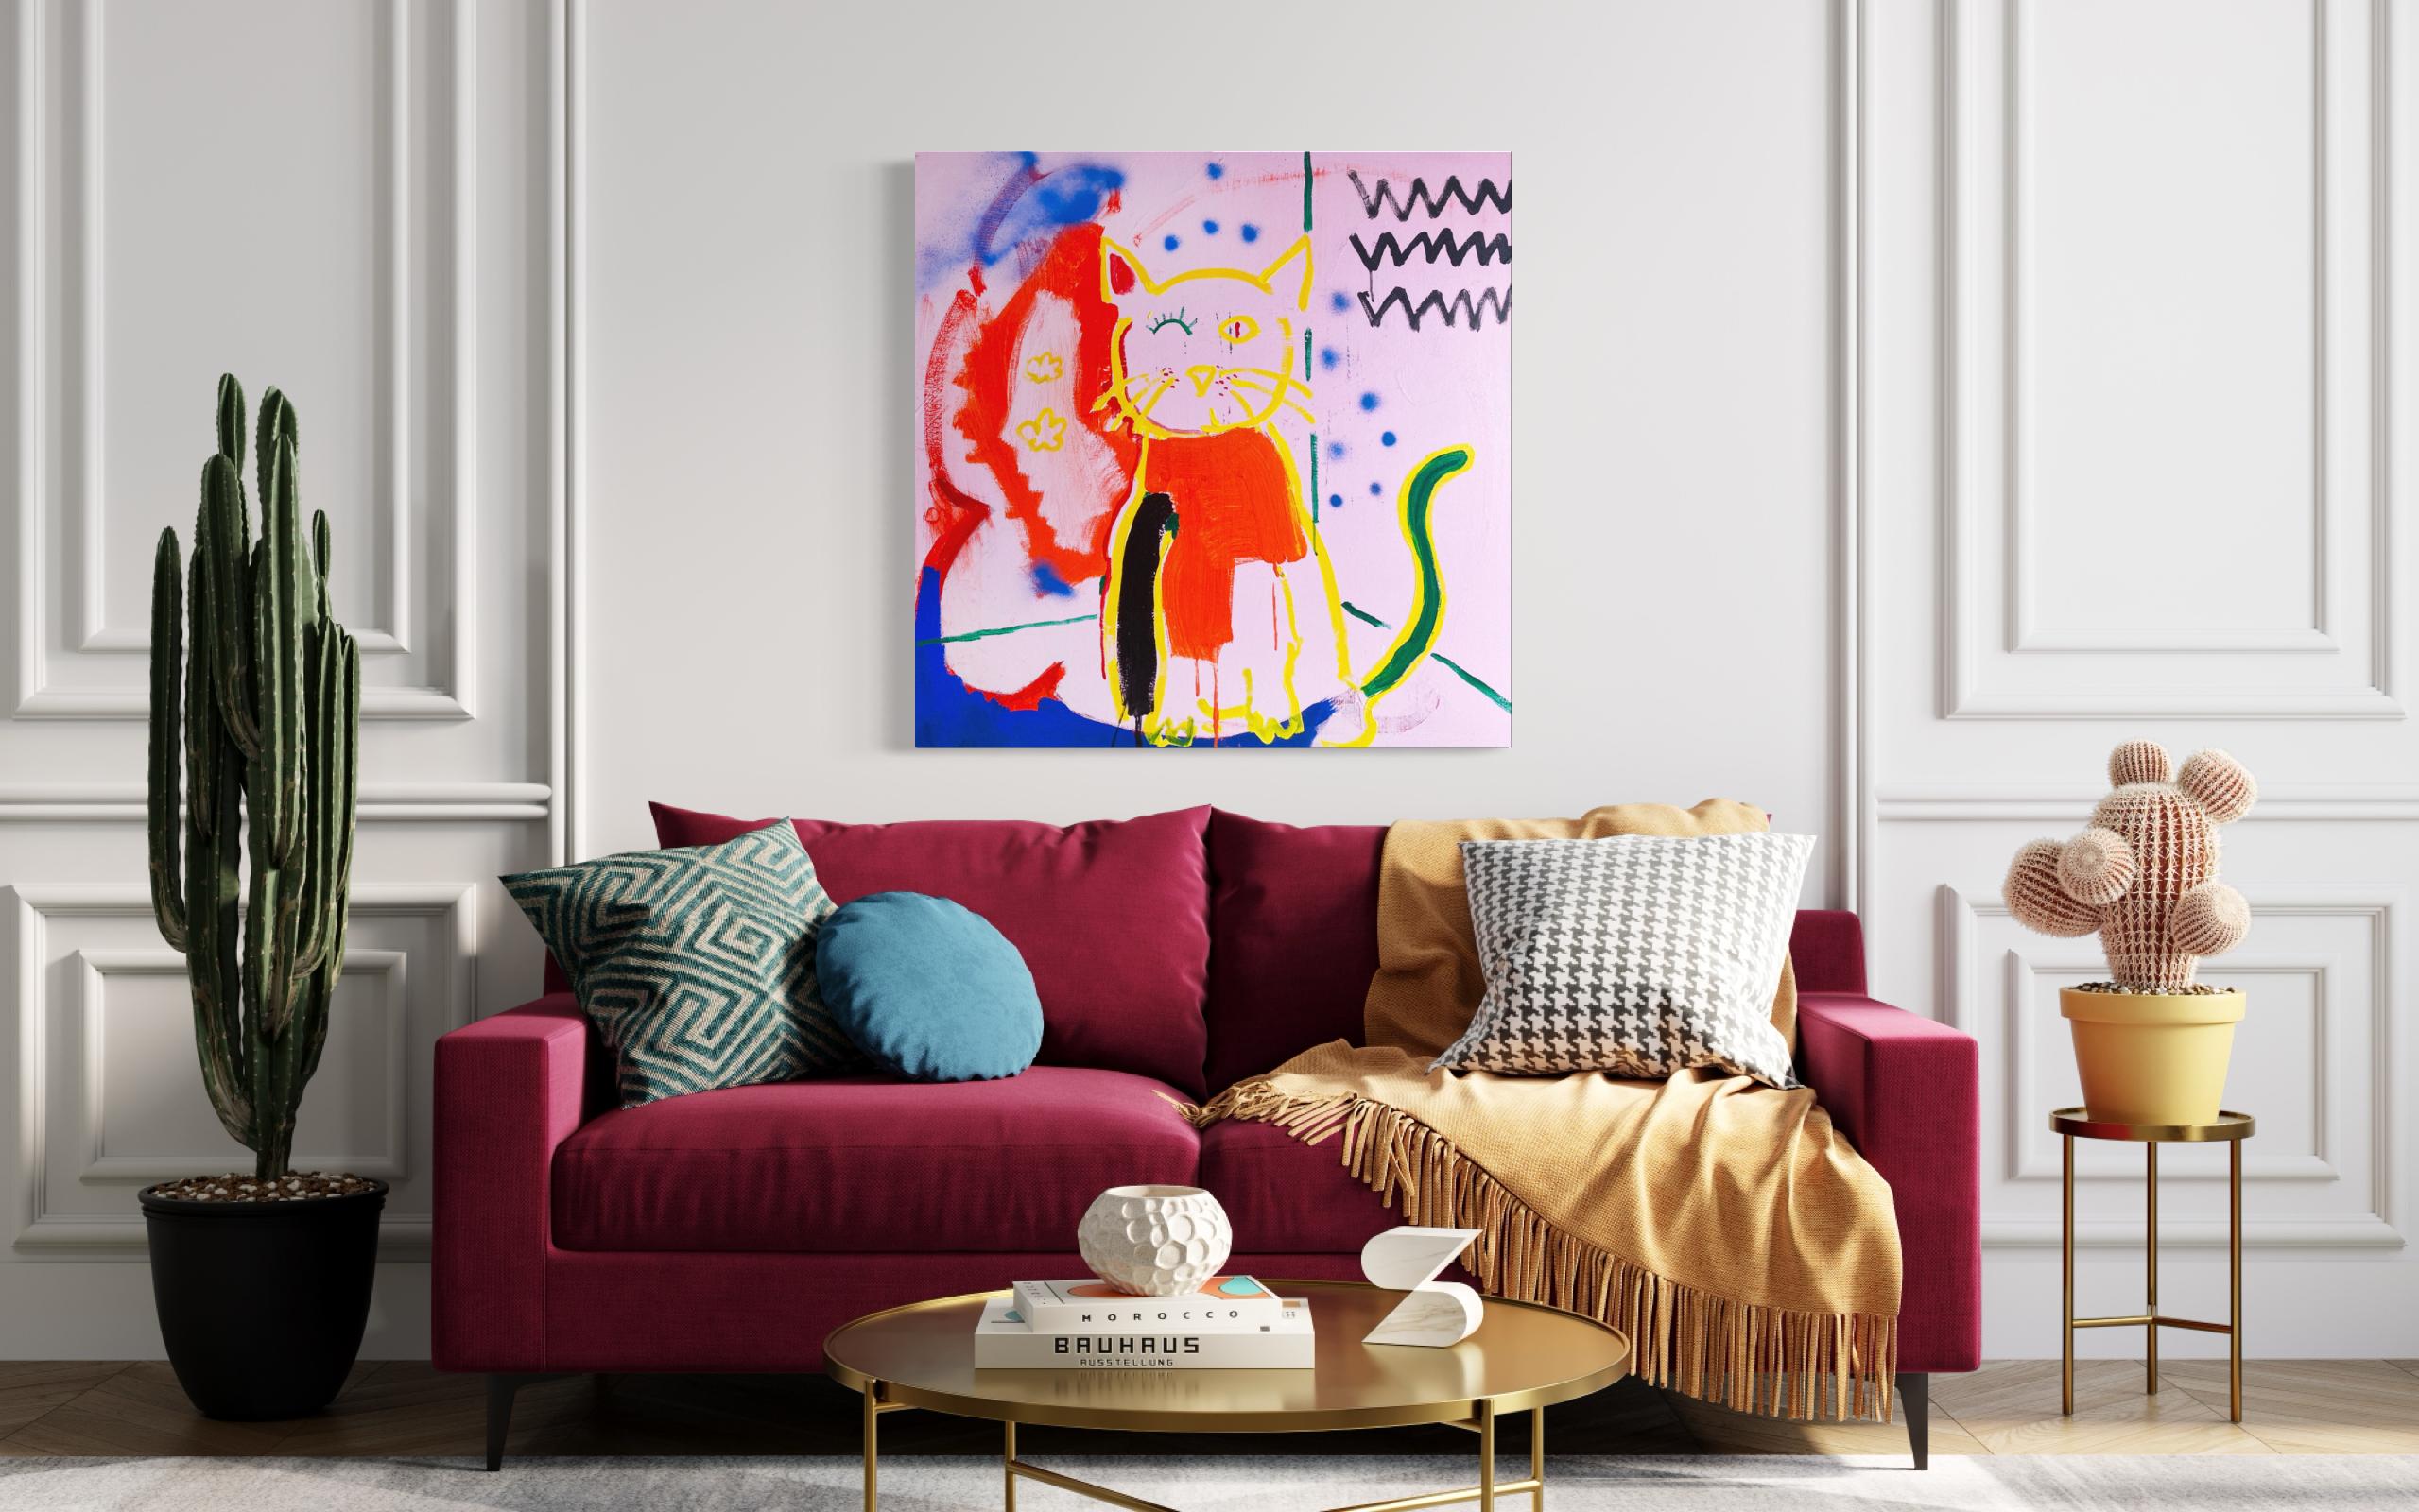 Winking Cat, is an experimental piece combining mixed medias, abstract forms, hints of pattern and gesture.  A one off, original by the artist, this painting is a unique venture for Higgins and brings a playful, energetic pop like feel to a space.